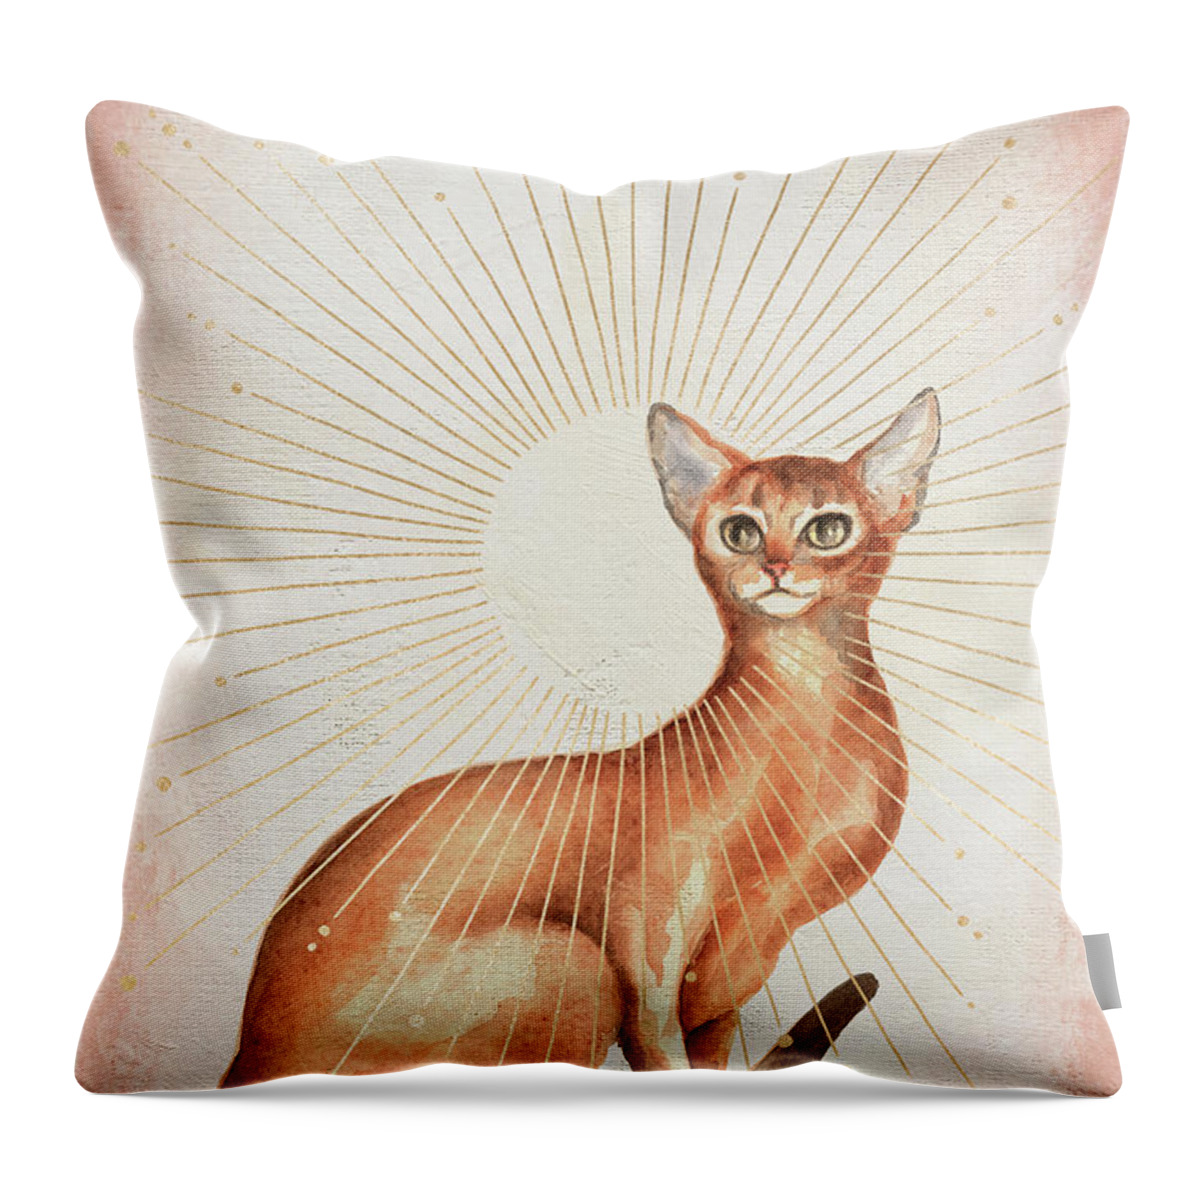 Abyssinian Cat Throw Pillow featuring the painting Abyssinian Cat by Garden Of Delights